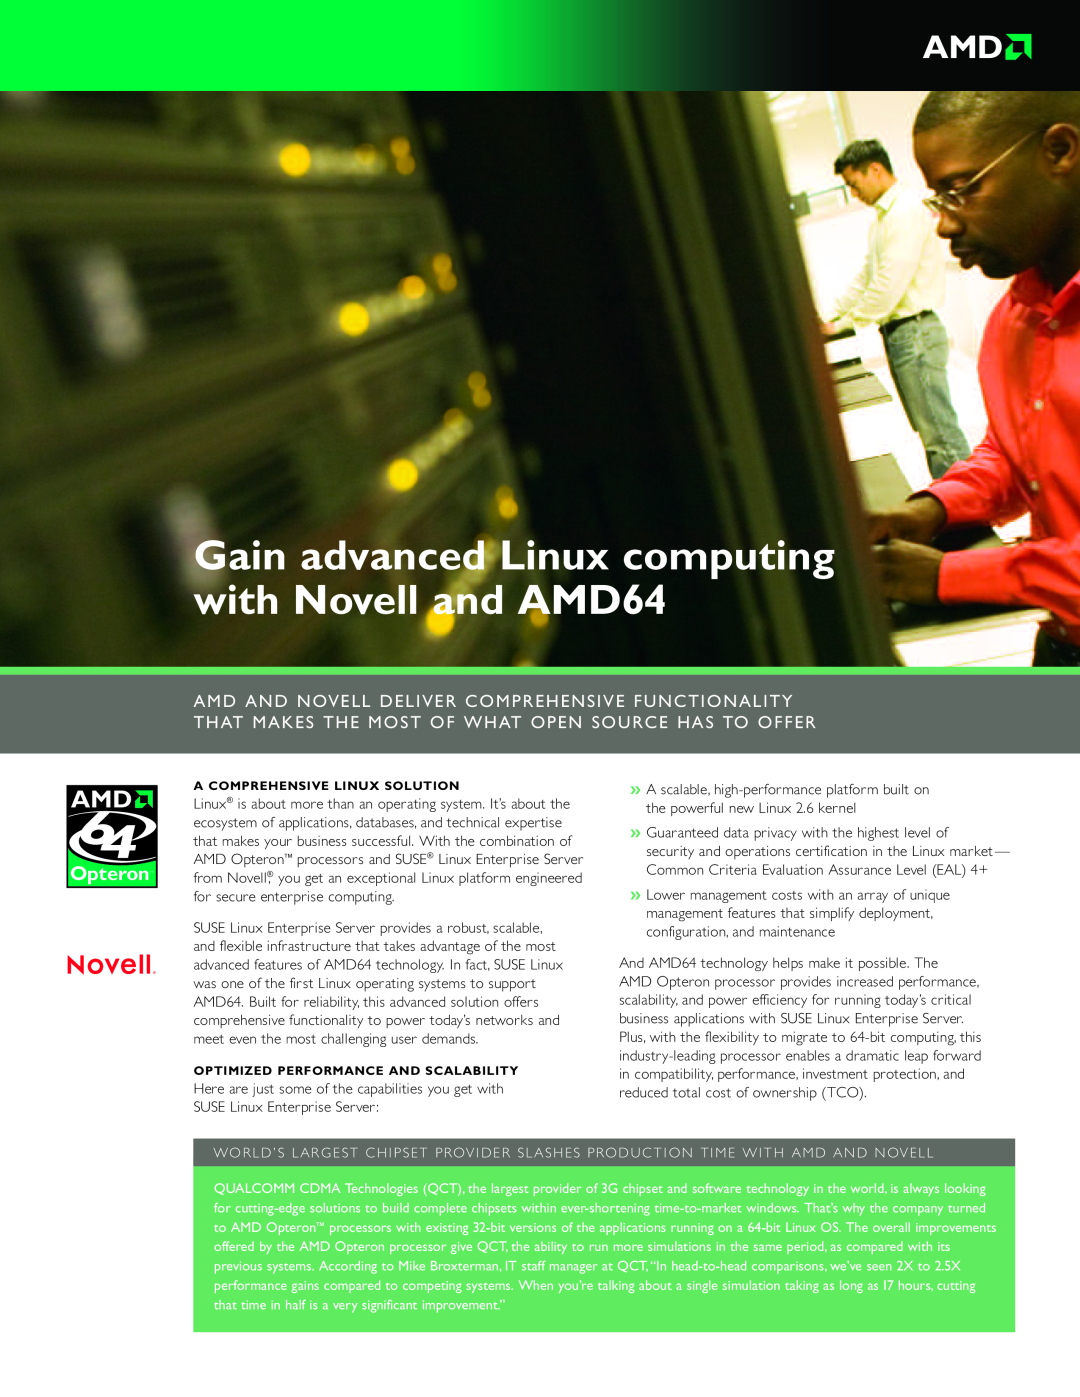 AMD manual Performance Guidelines for AMD Athlon 64 and, AMD Opteron ccNUMA Multiprocessor Systems, Application Note 